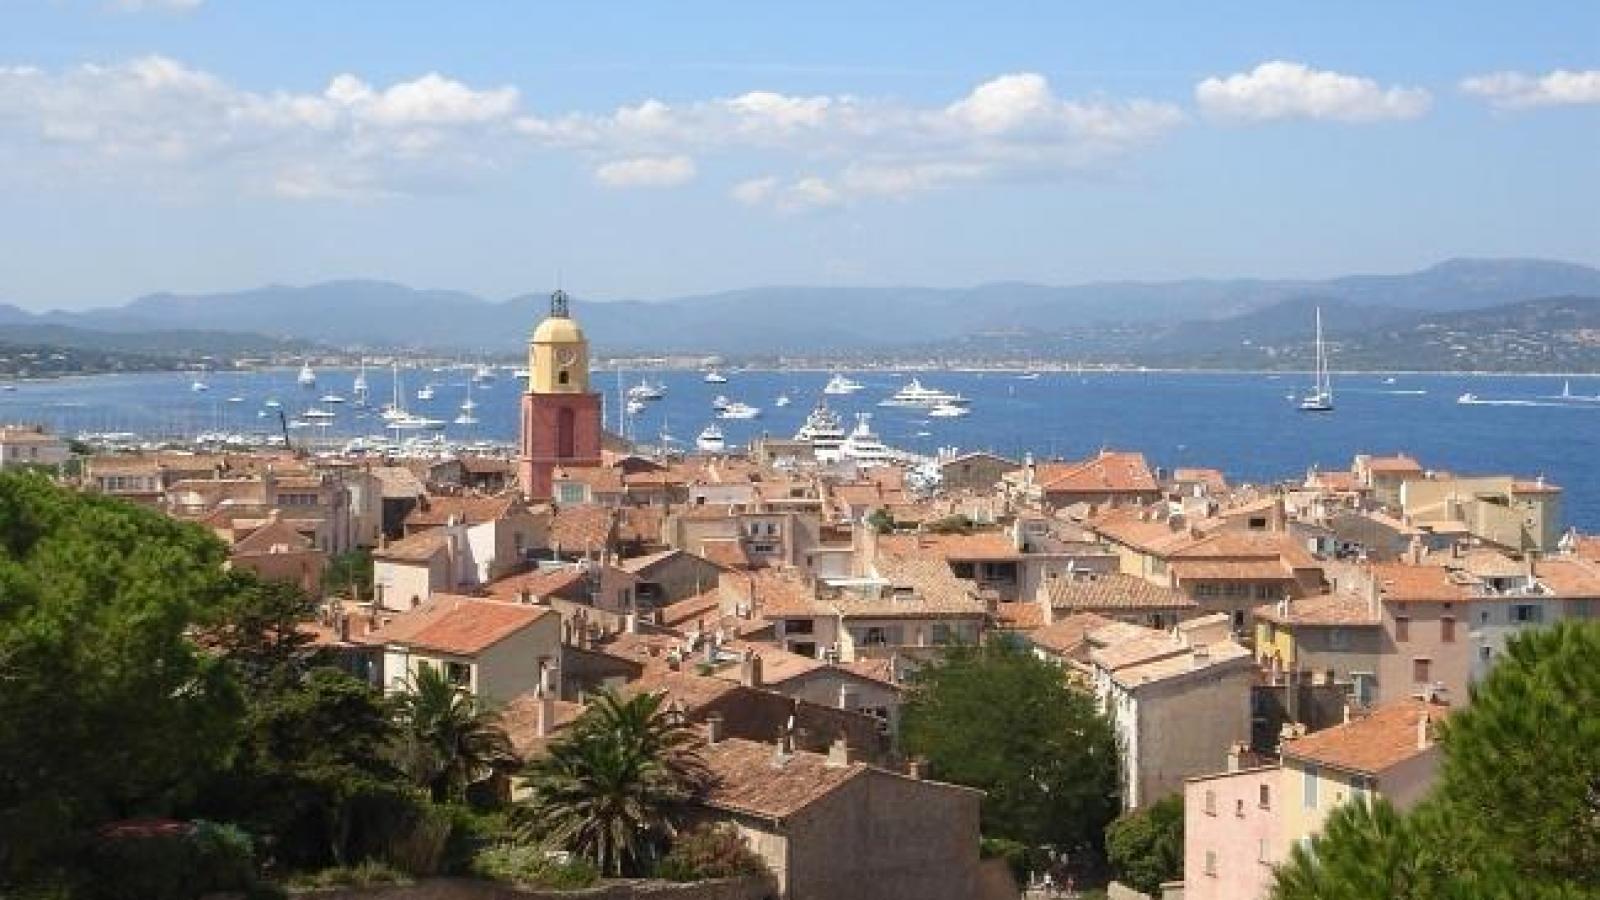 Saint Tropez : spring awaits at the Hotel Sezz